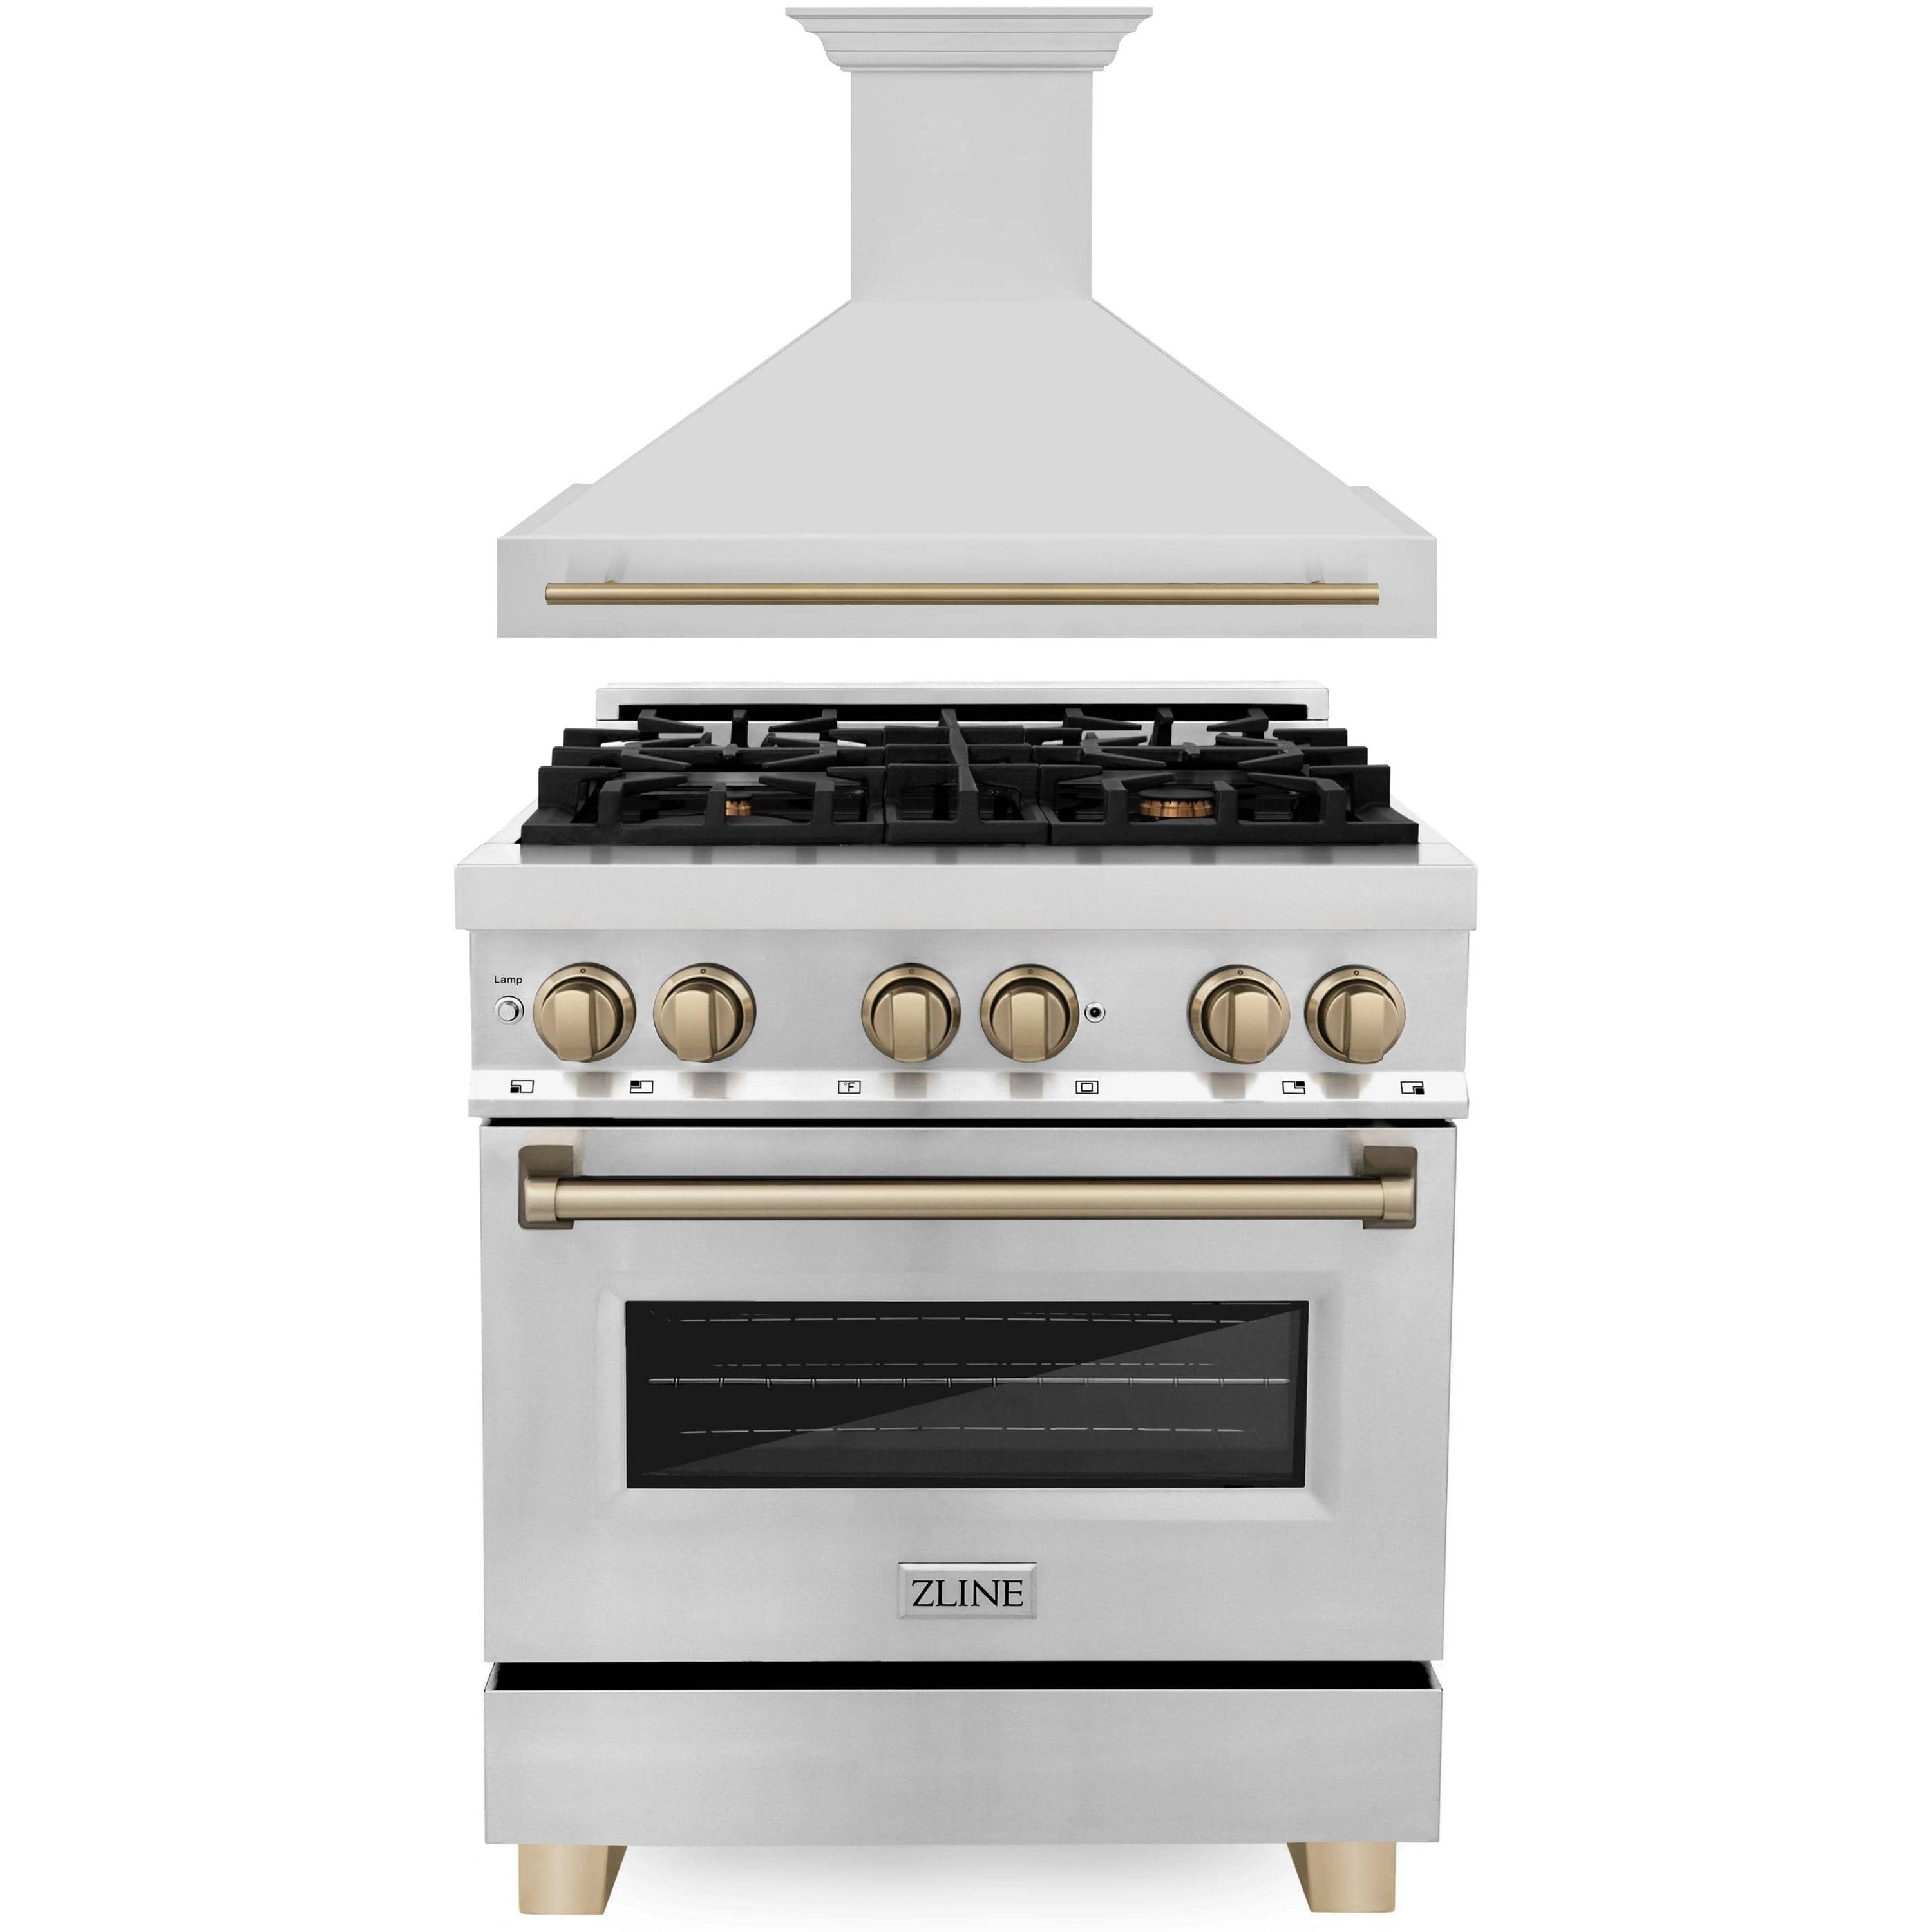 ZLINE Autograph Edition 2-Piece Appliance Package - 30-Inch Dual Fuel Range & Wall Mounted Range Hood in Stainless Steel with Champagne Bronze Trim (2AKP-RARH30-CB)